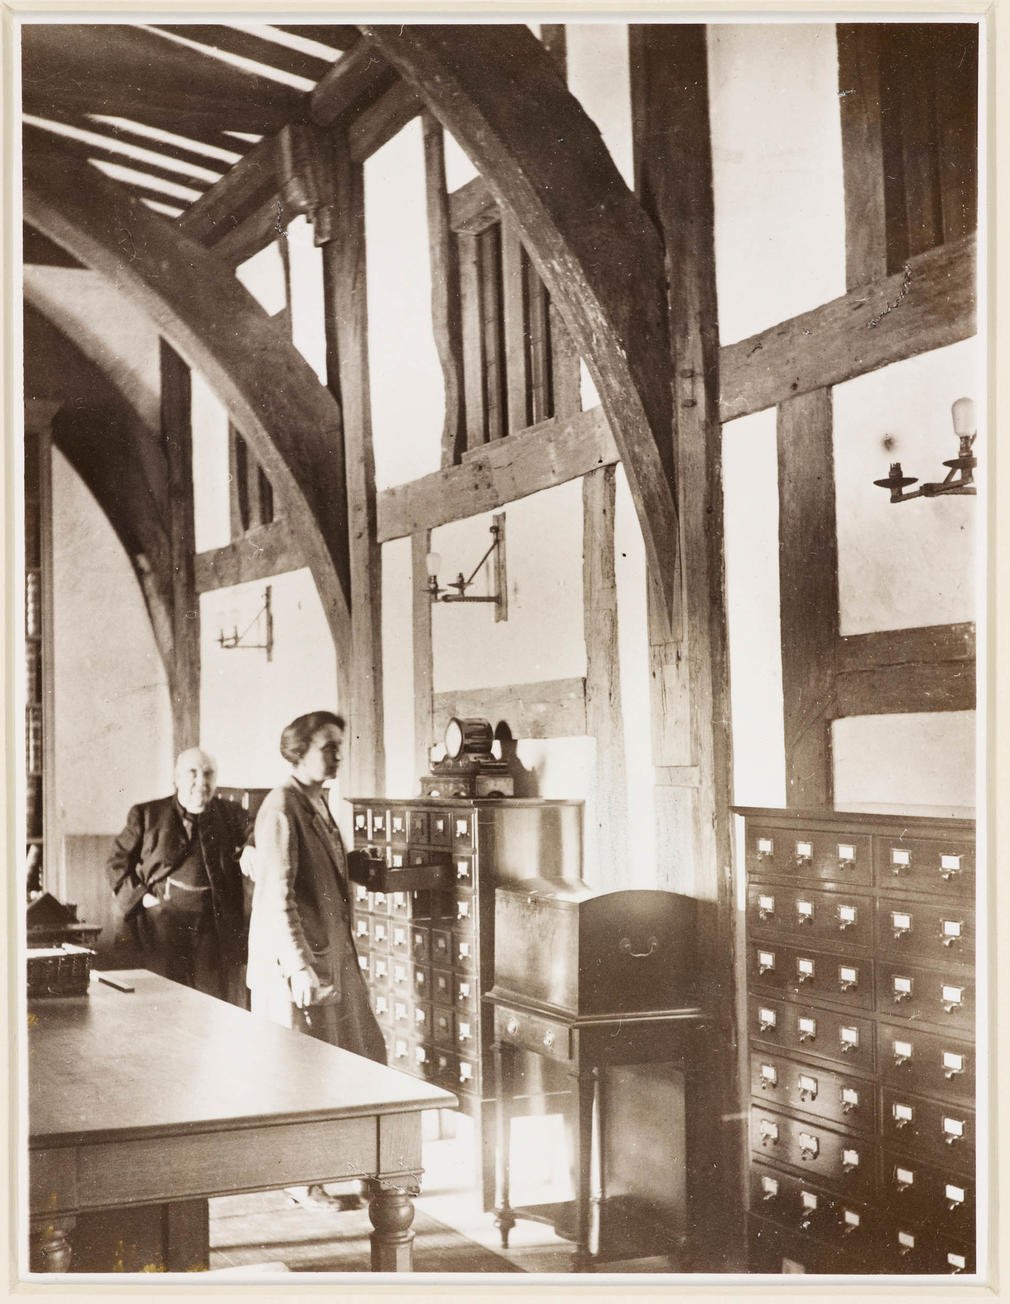 The Muniment Room, used by the Royal Archives in 1929